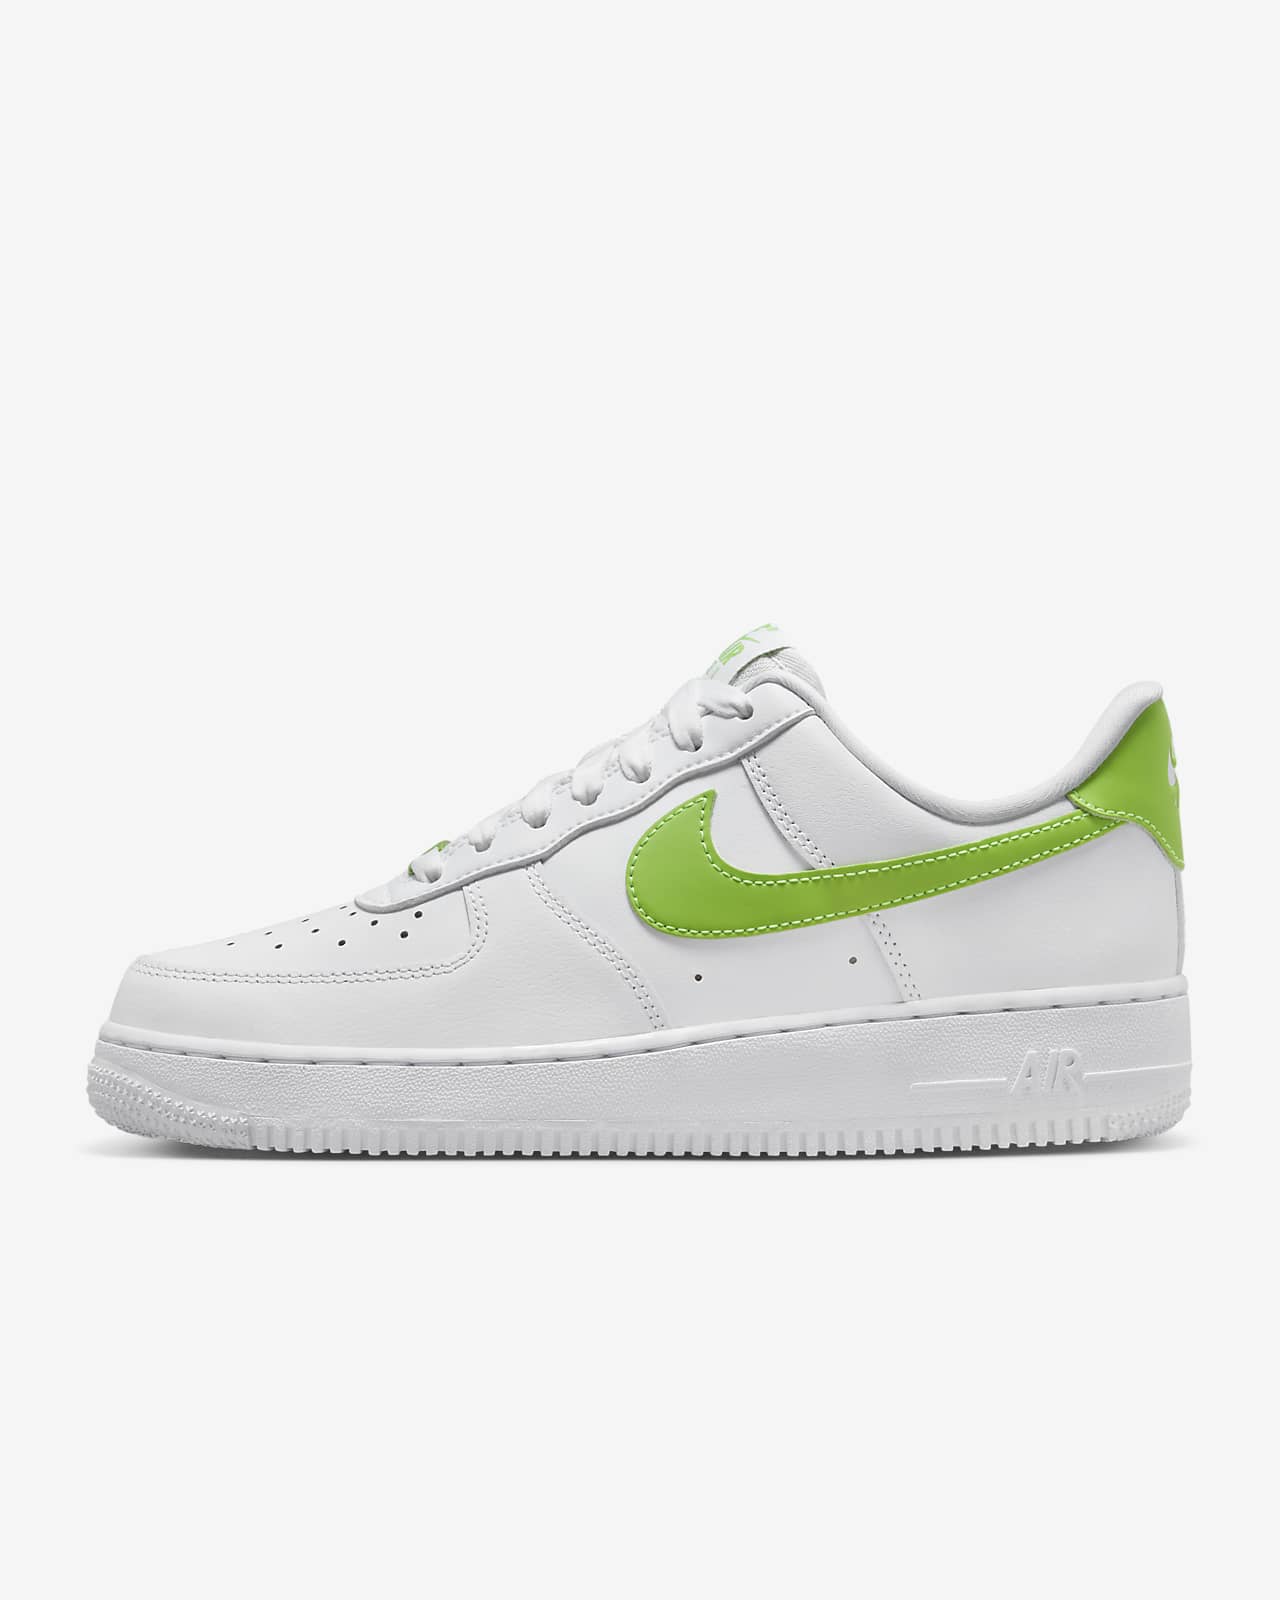 Nike Air Force 1 07 Womens Shoes Review